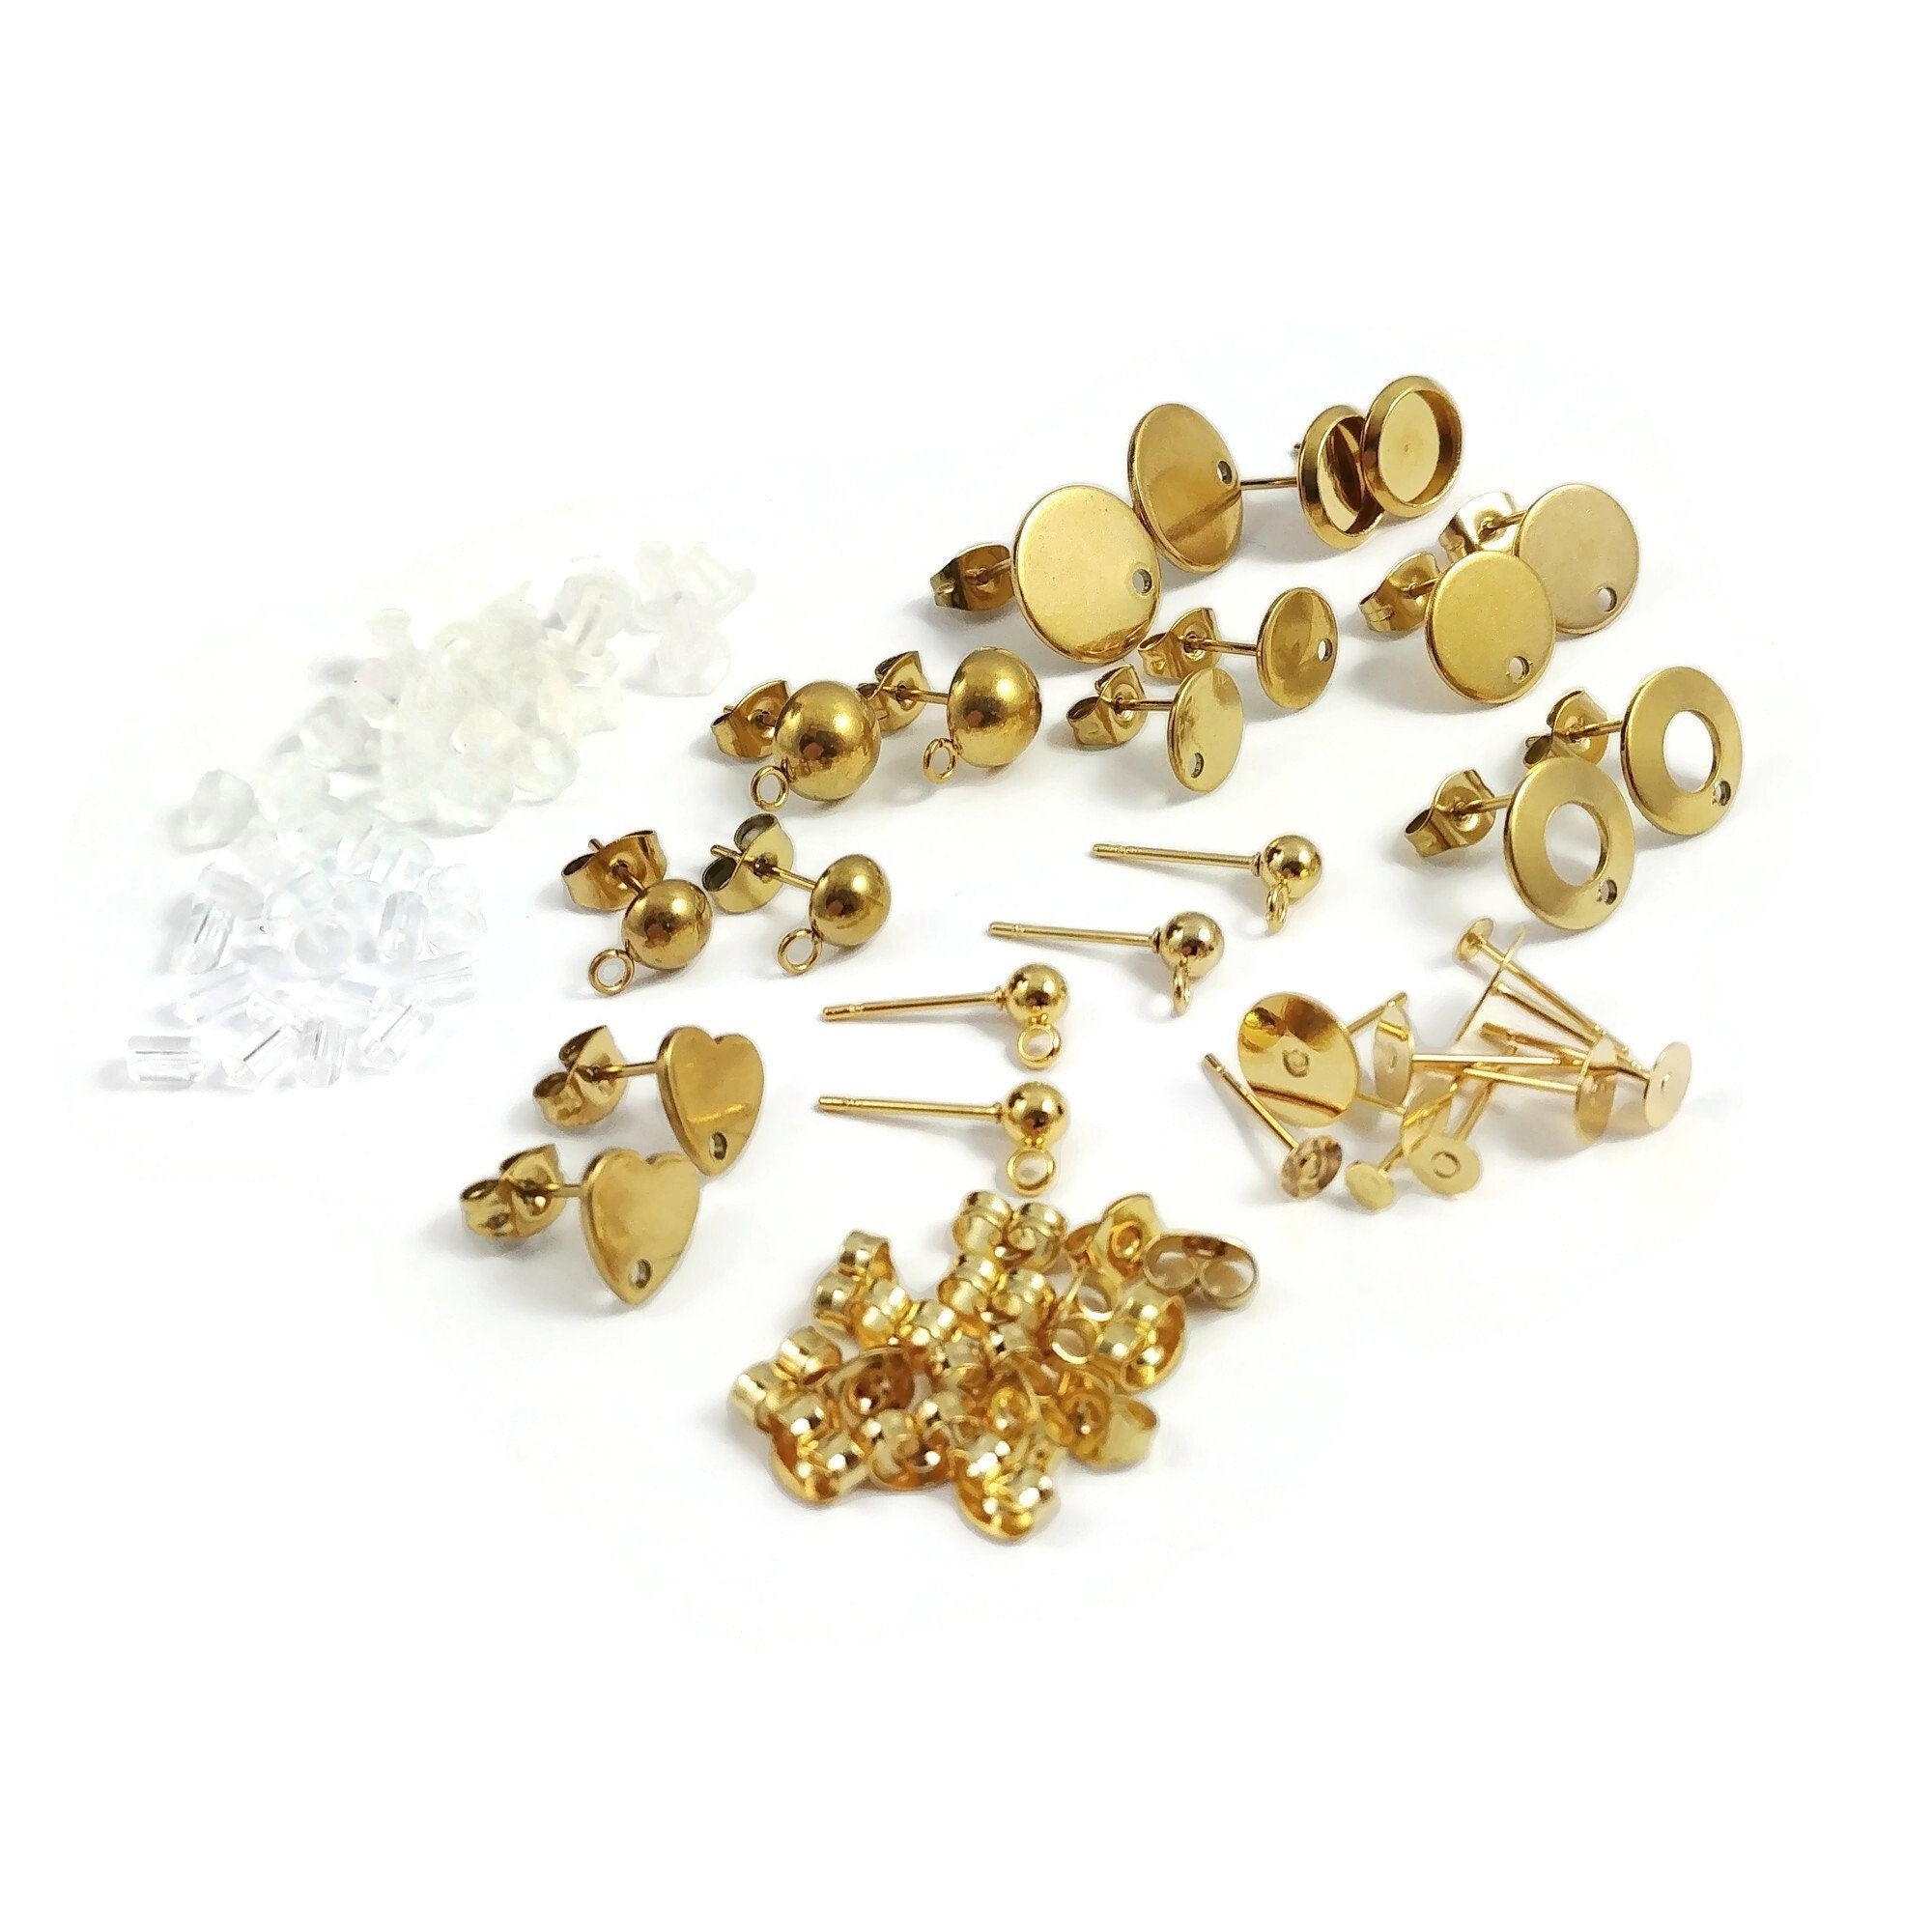 Earring making starter kit, Stainless steel posts 50pcs, Hypoallergenic stud jewelry findings, Sample pack